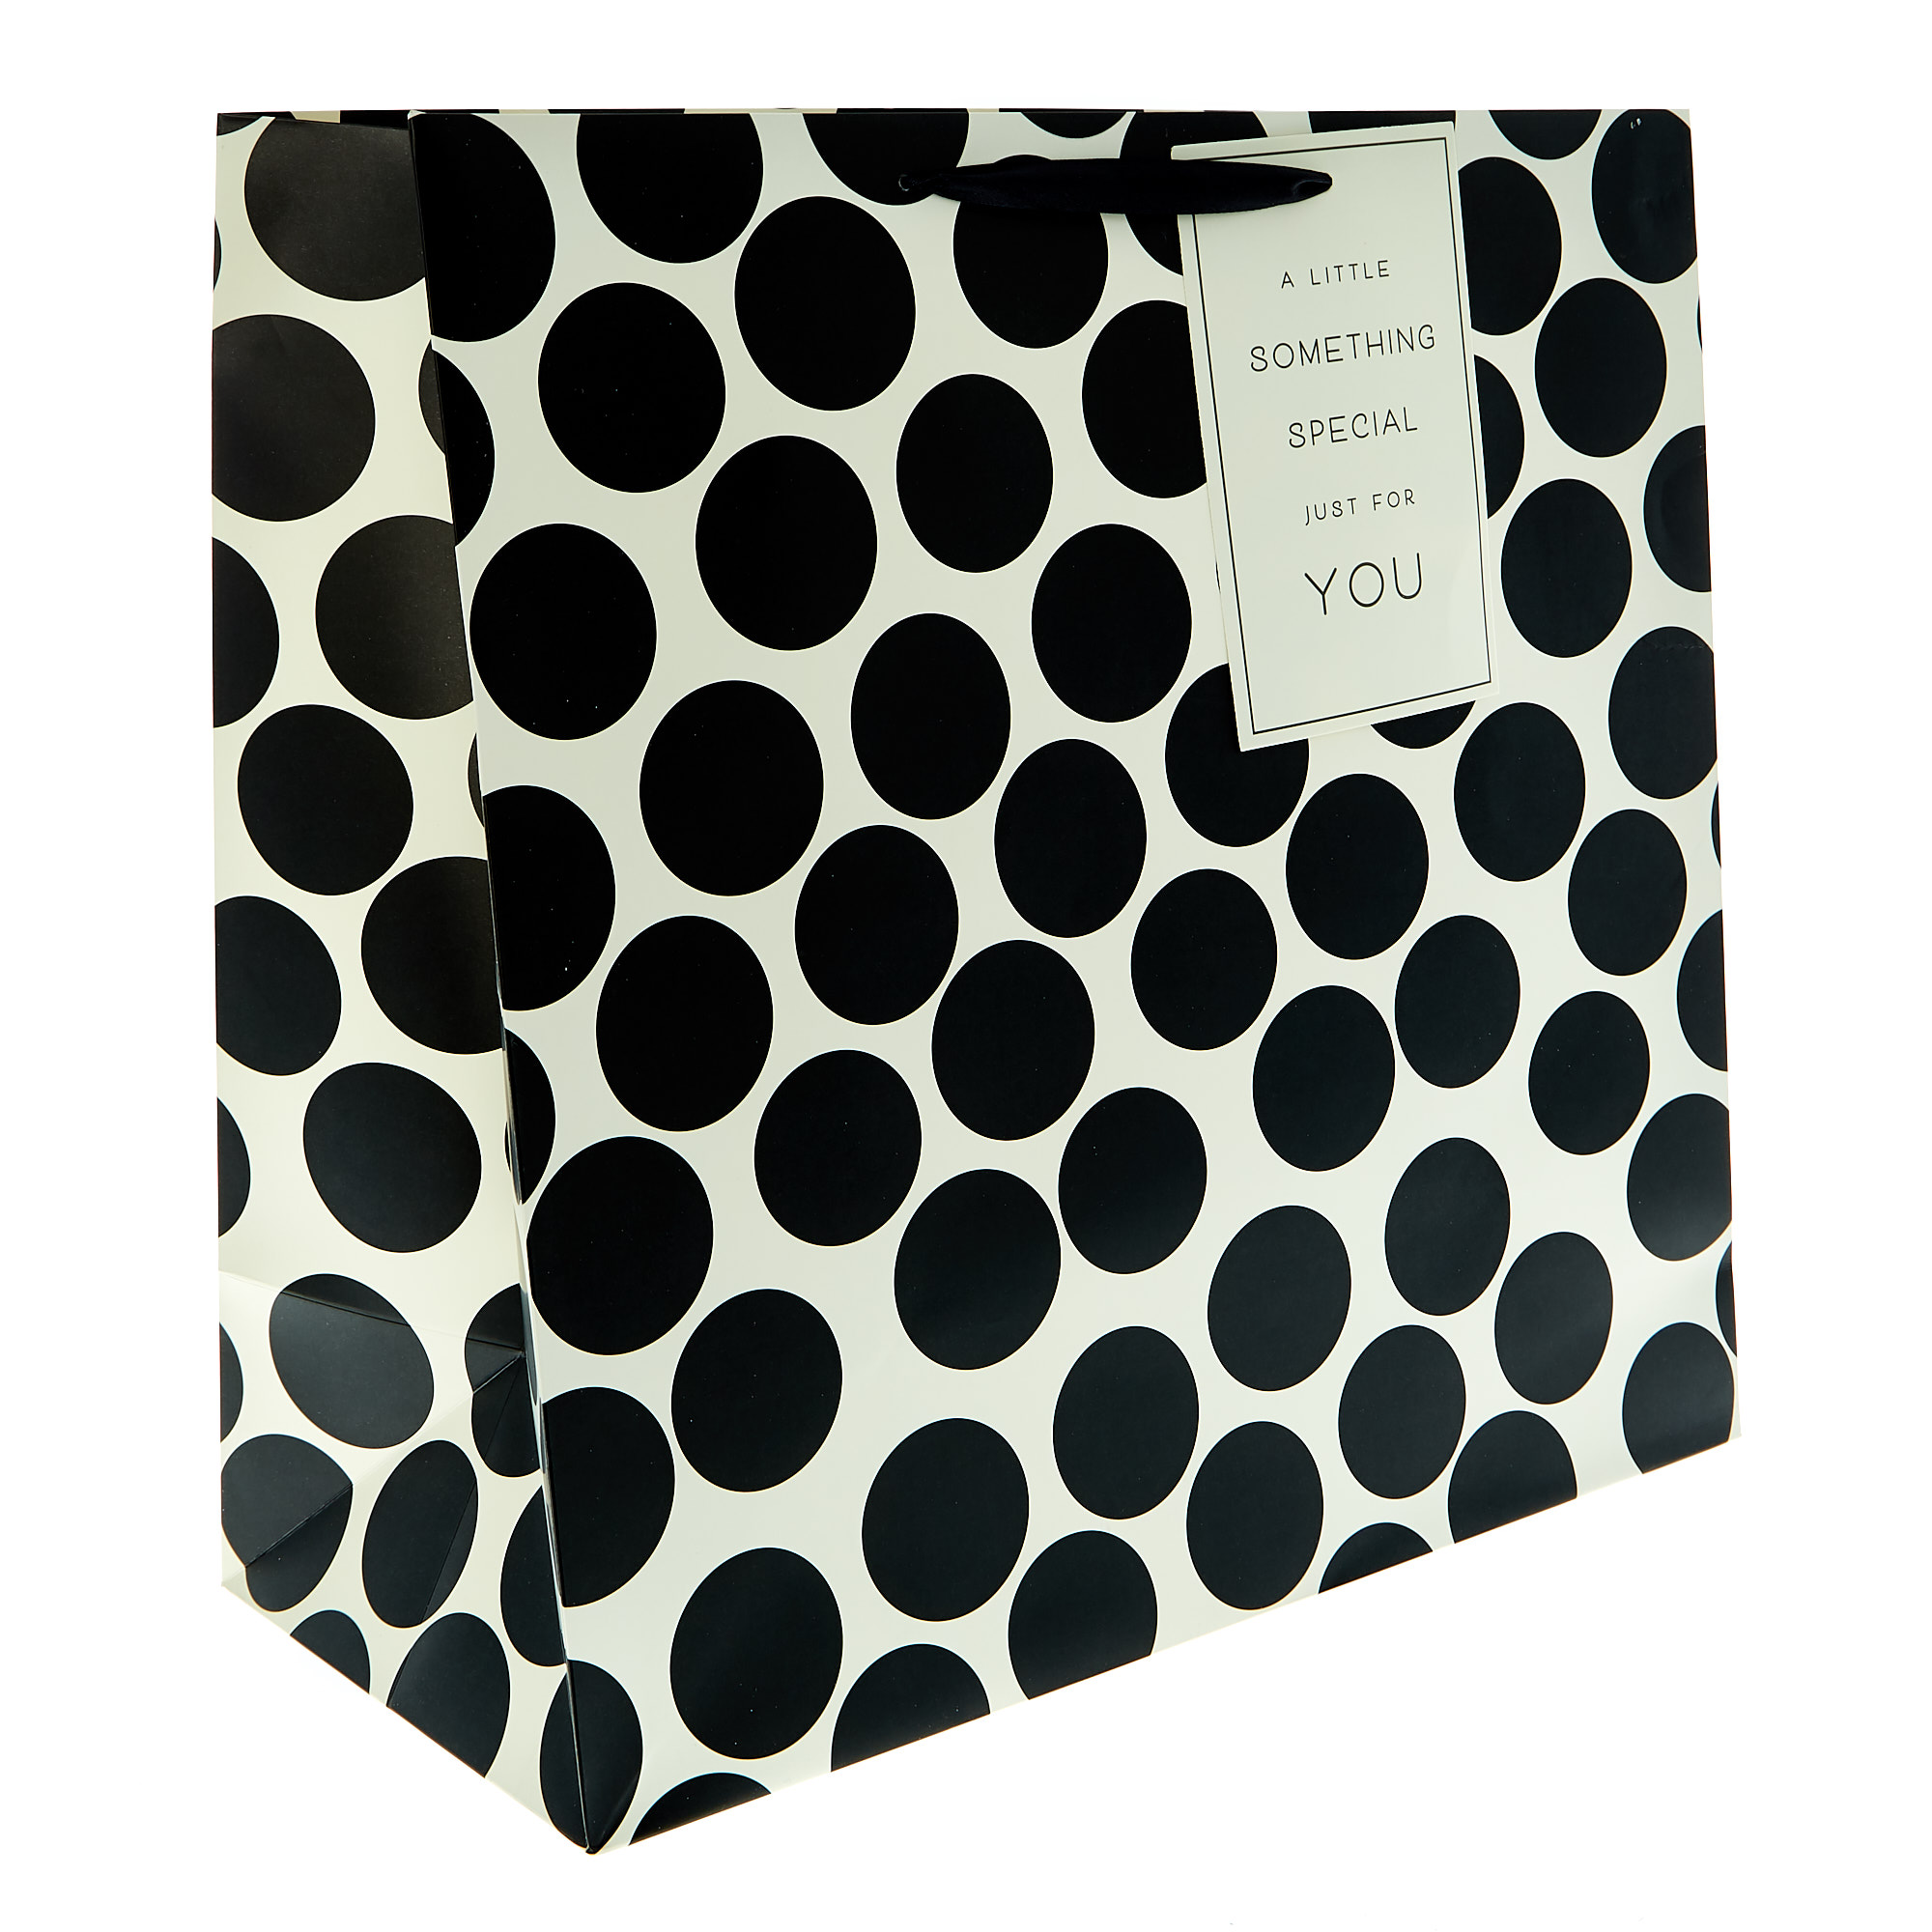 Buy Extra Large Square Gift Bag - Black Spots Something Special for GBP 1.99